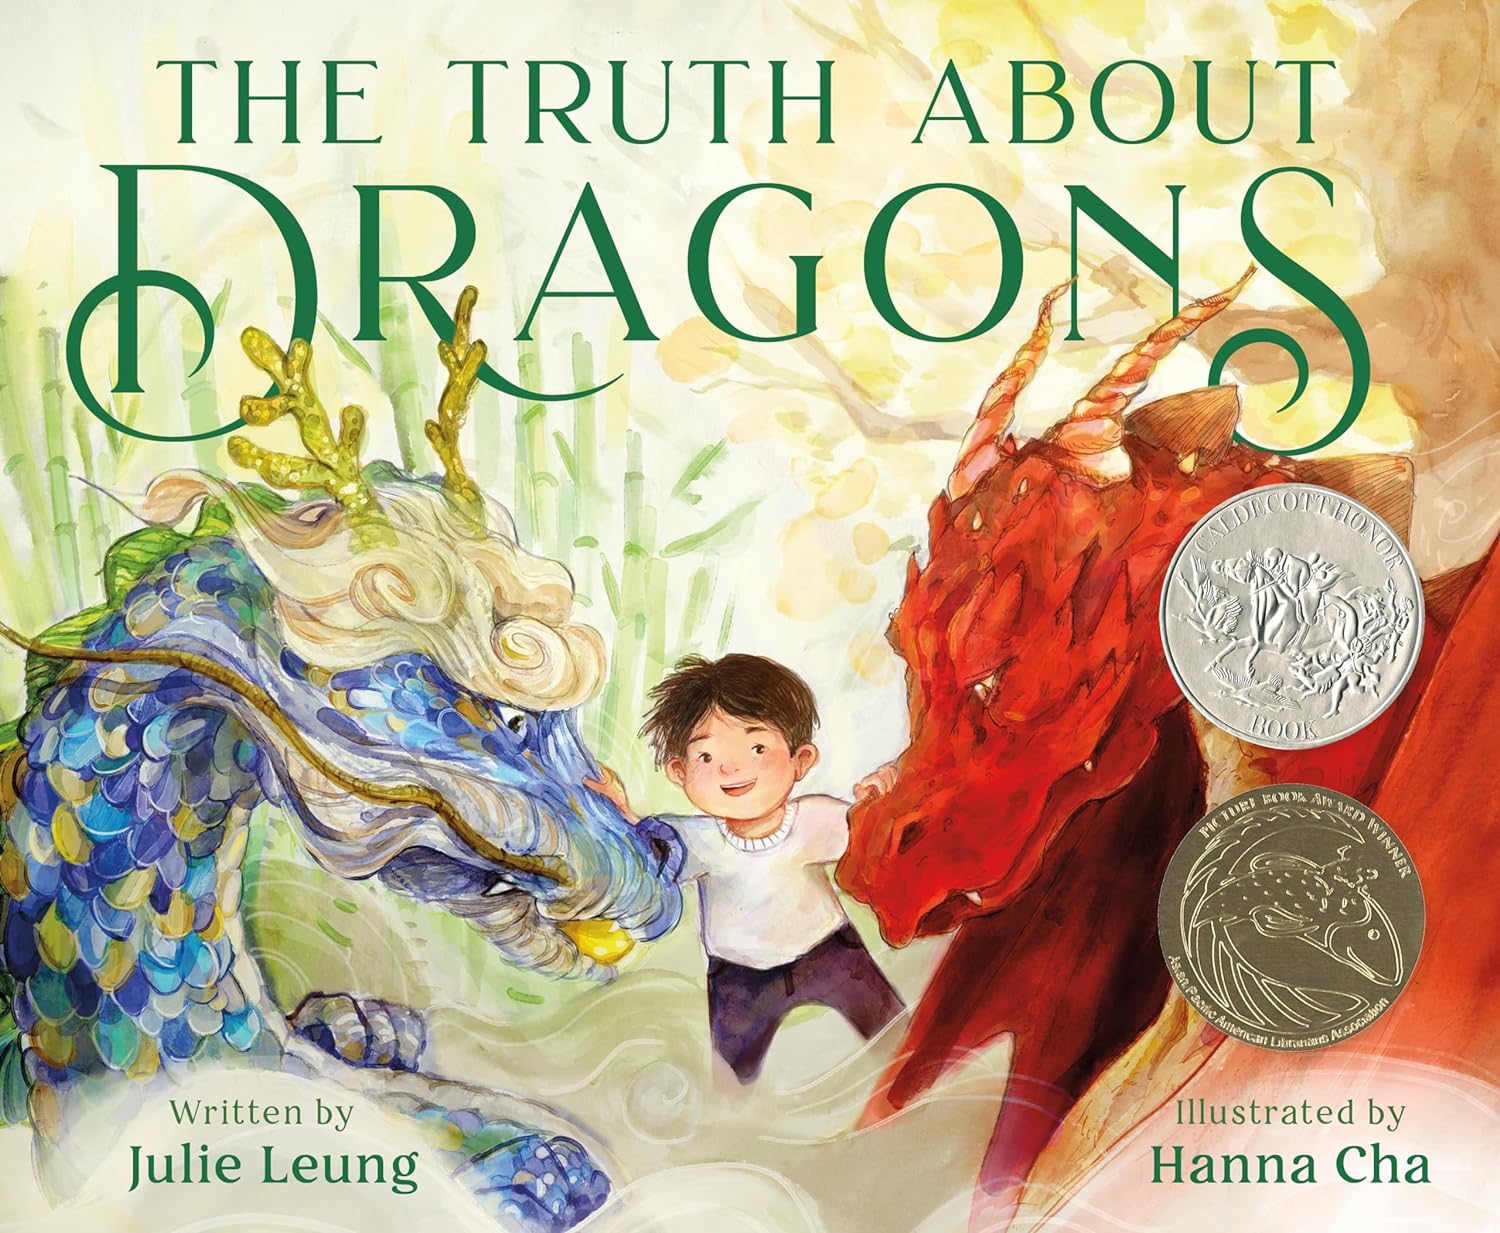 The Truth About Dragons mixed race biracial book for kids